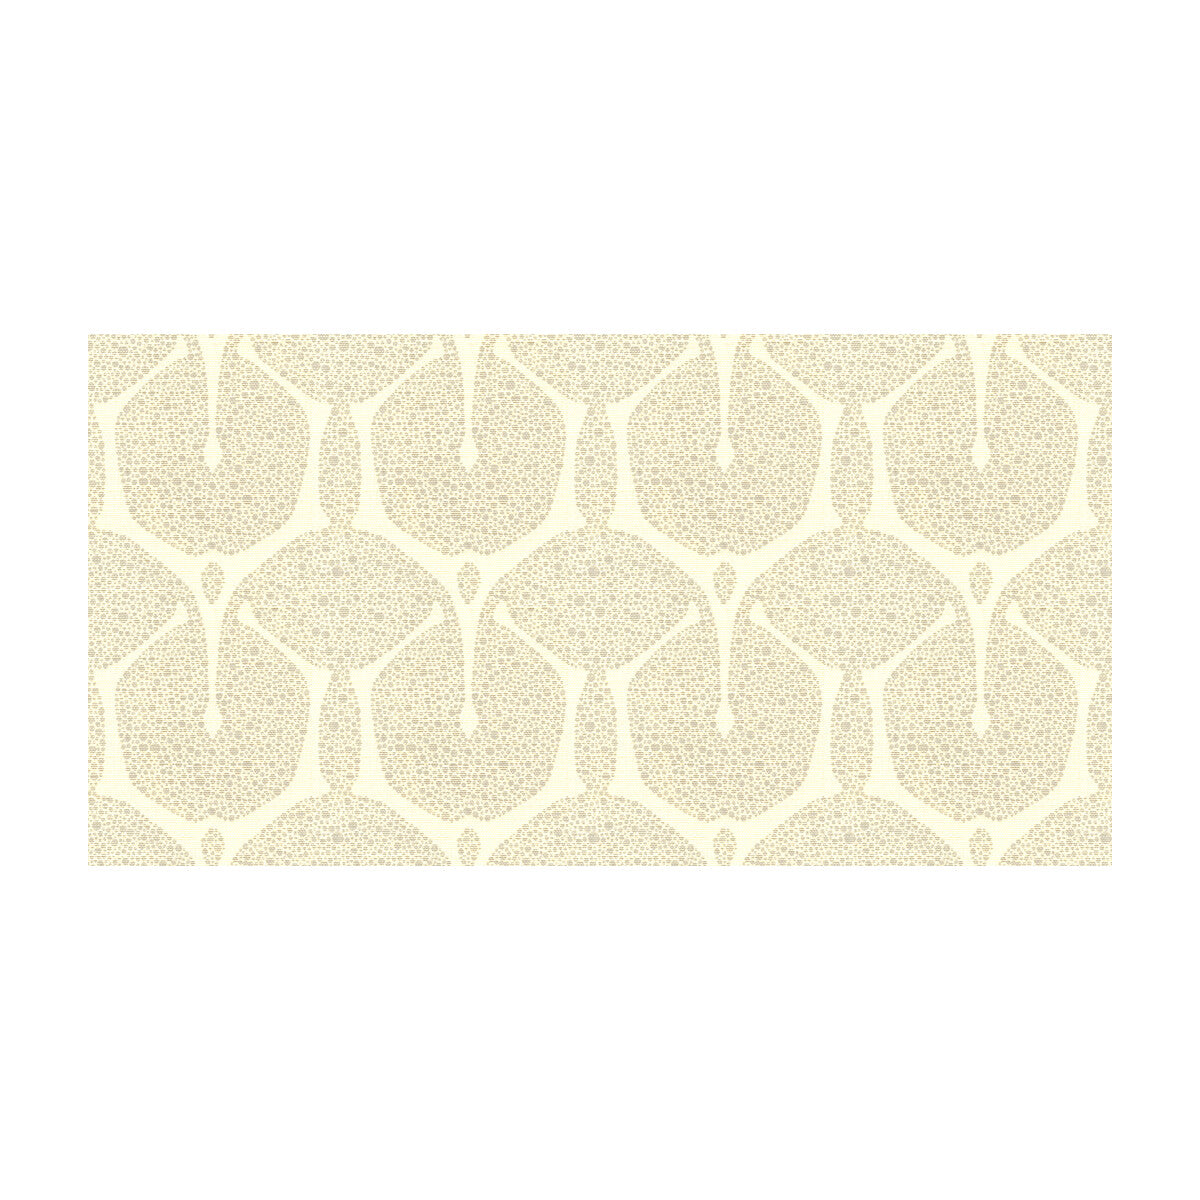 Element fabric in pearl color - pattern GWF-3415.11.0 - by Lee Jofa Modern in the Ashley Hicks Textures collection